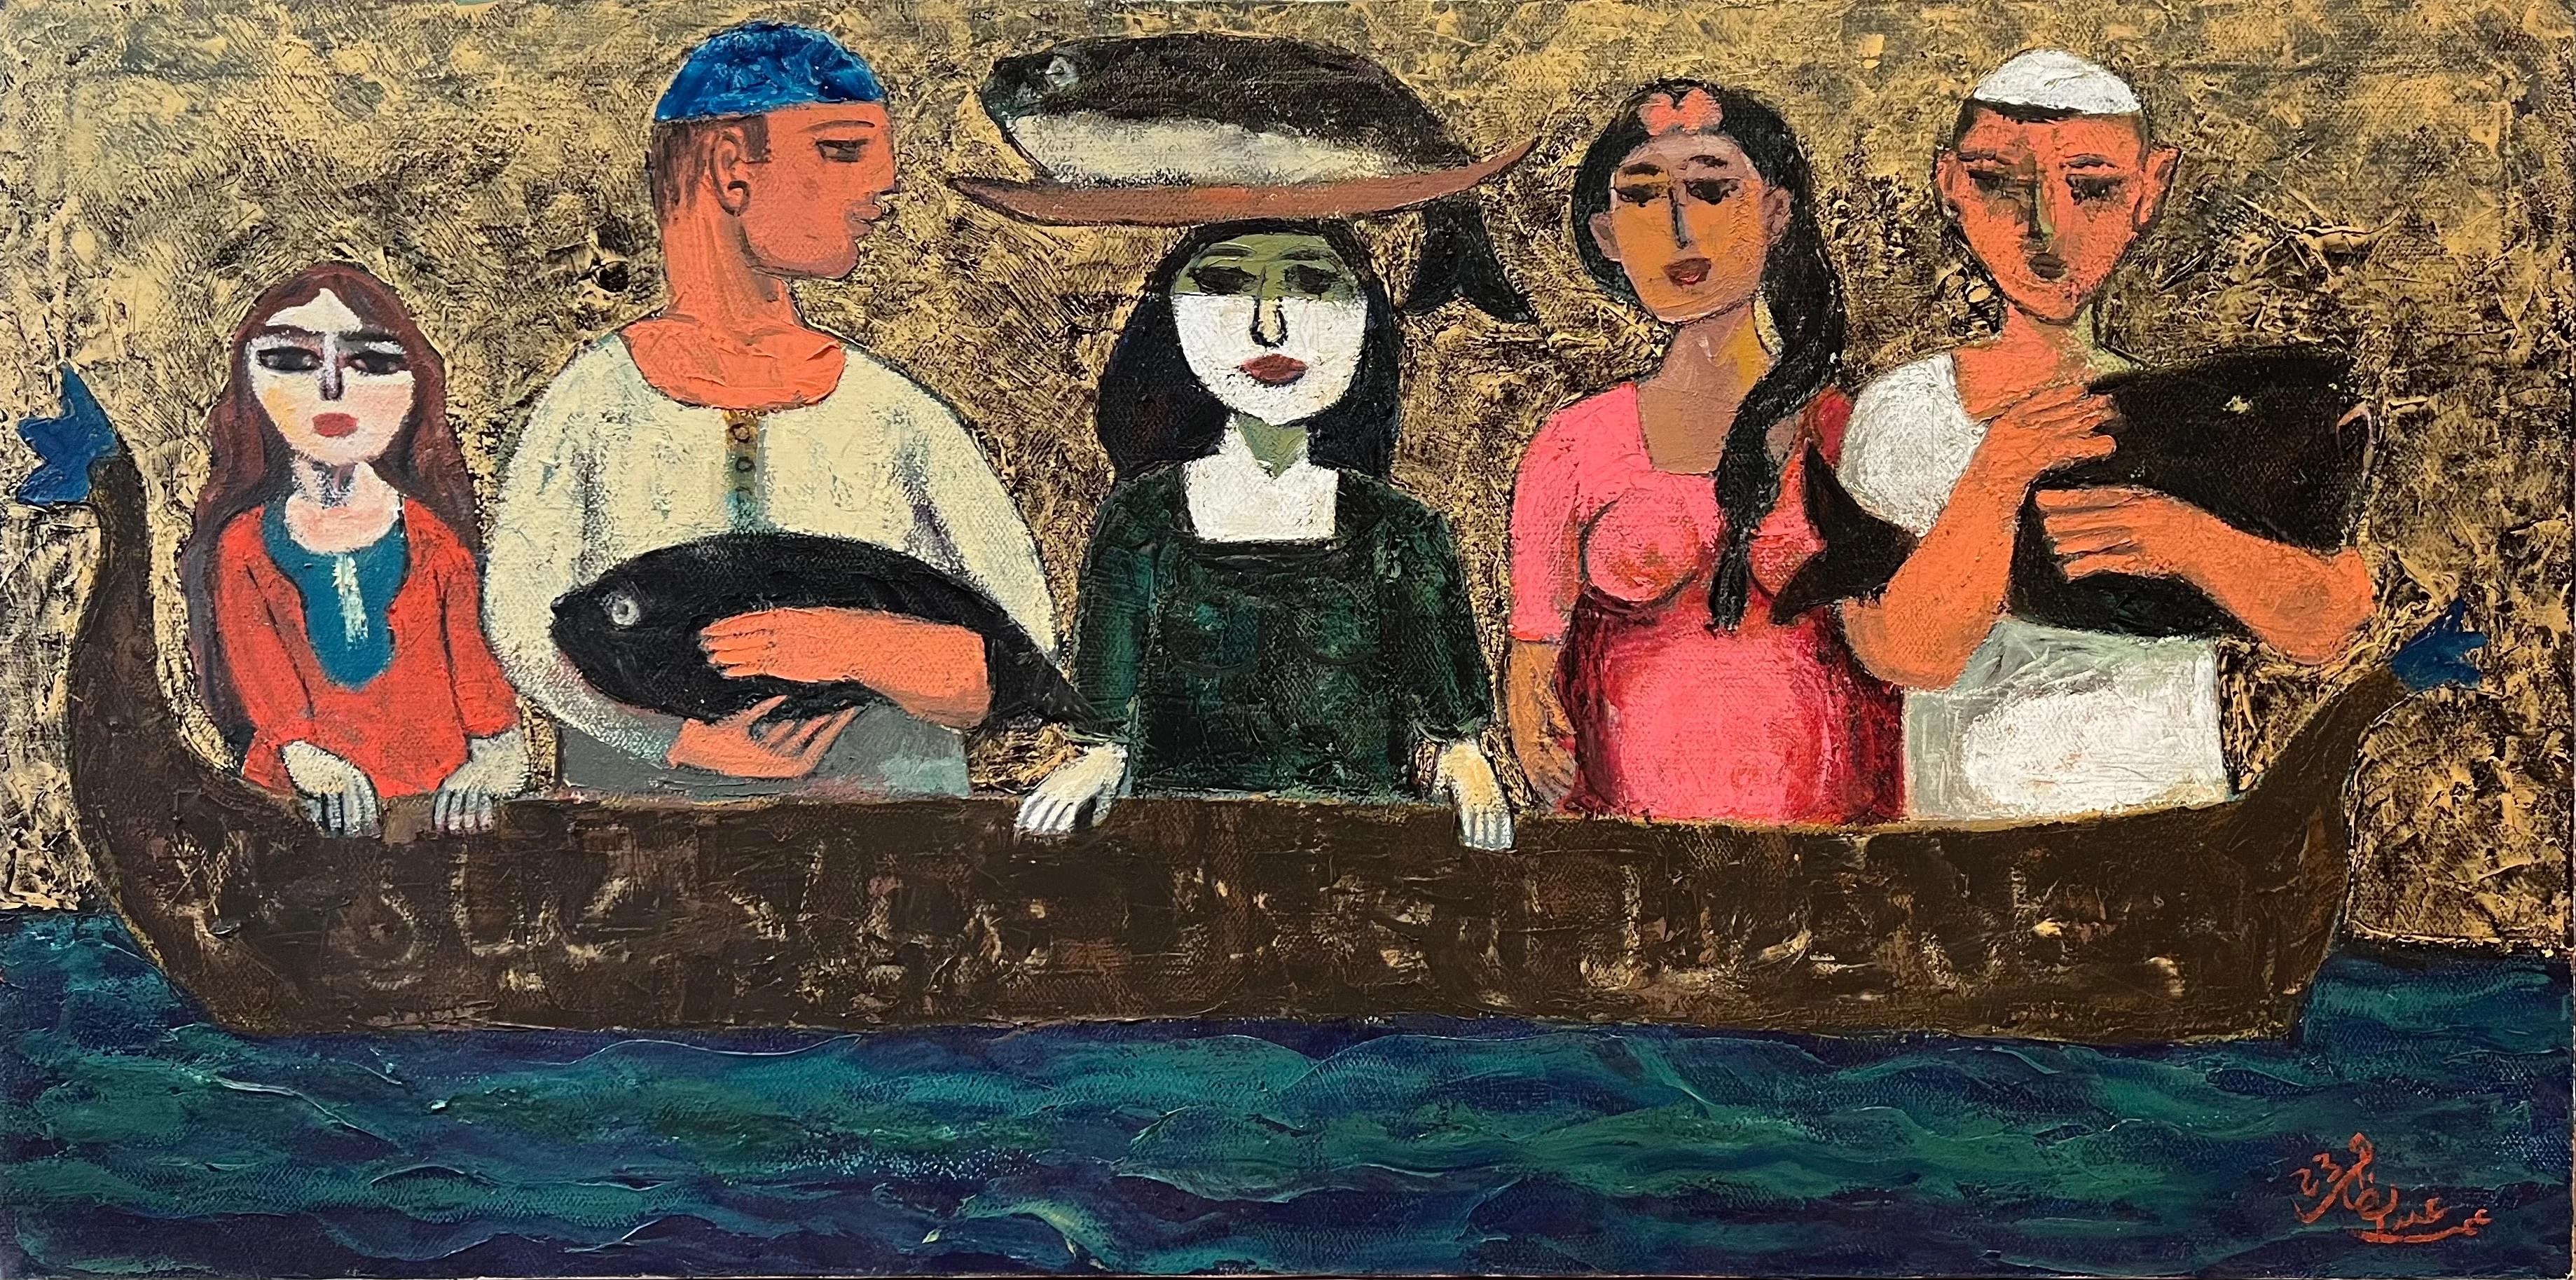 "River's Bounty" Oil painting 24" x 47" inch by Omar Abdel Zaher

Abdel Zaher is a graduate of the Academy of Fine Arts in Helwan and has been painting for three decades and has notably featured in a variety of collective exhibitions, including